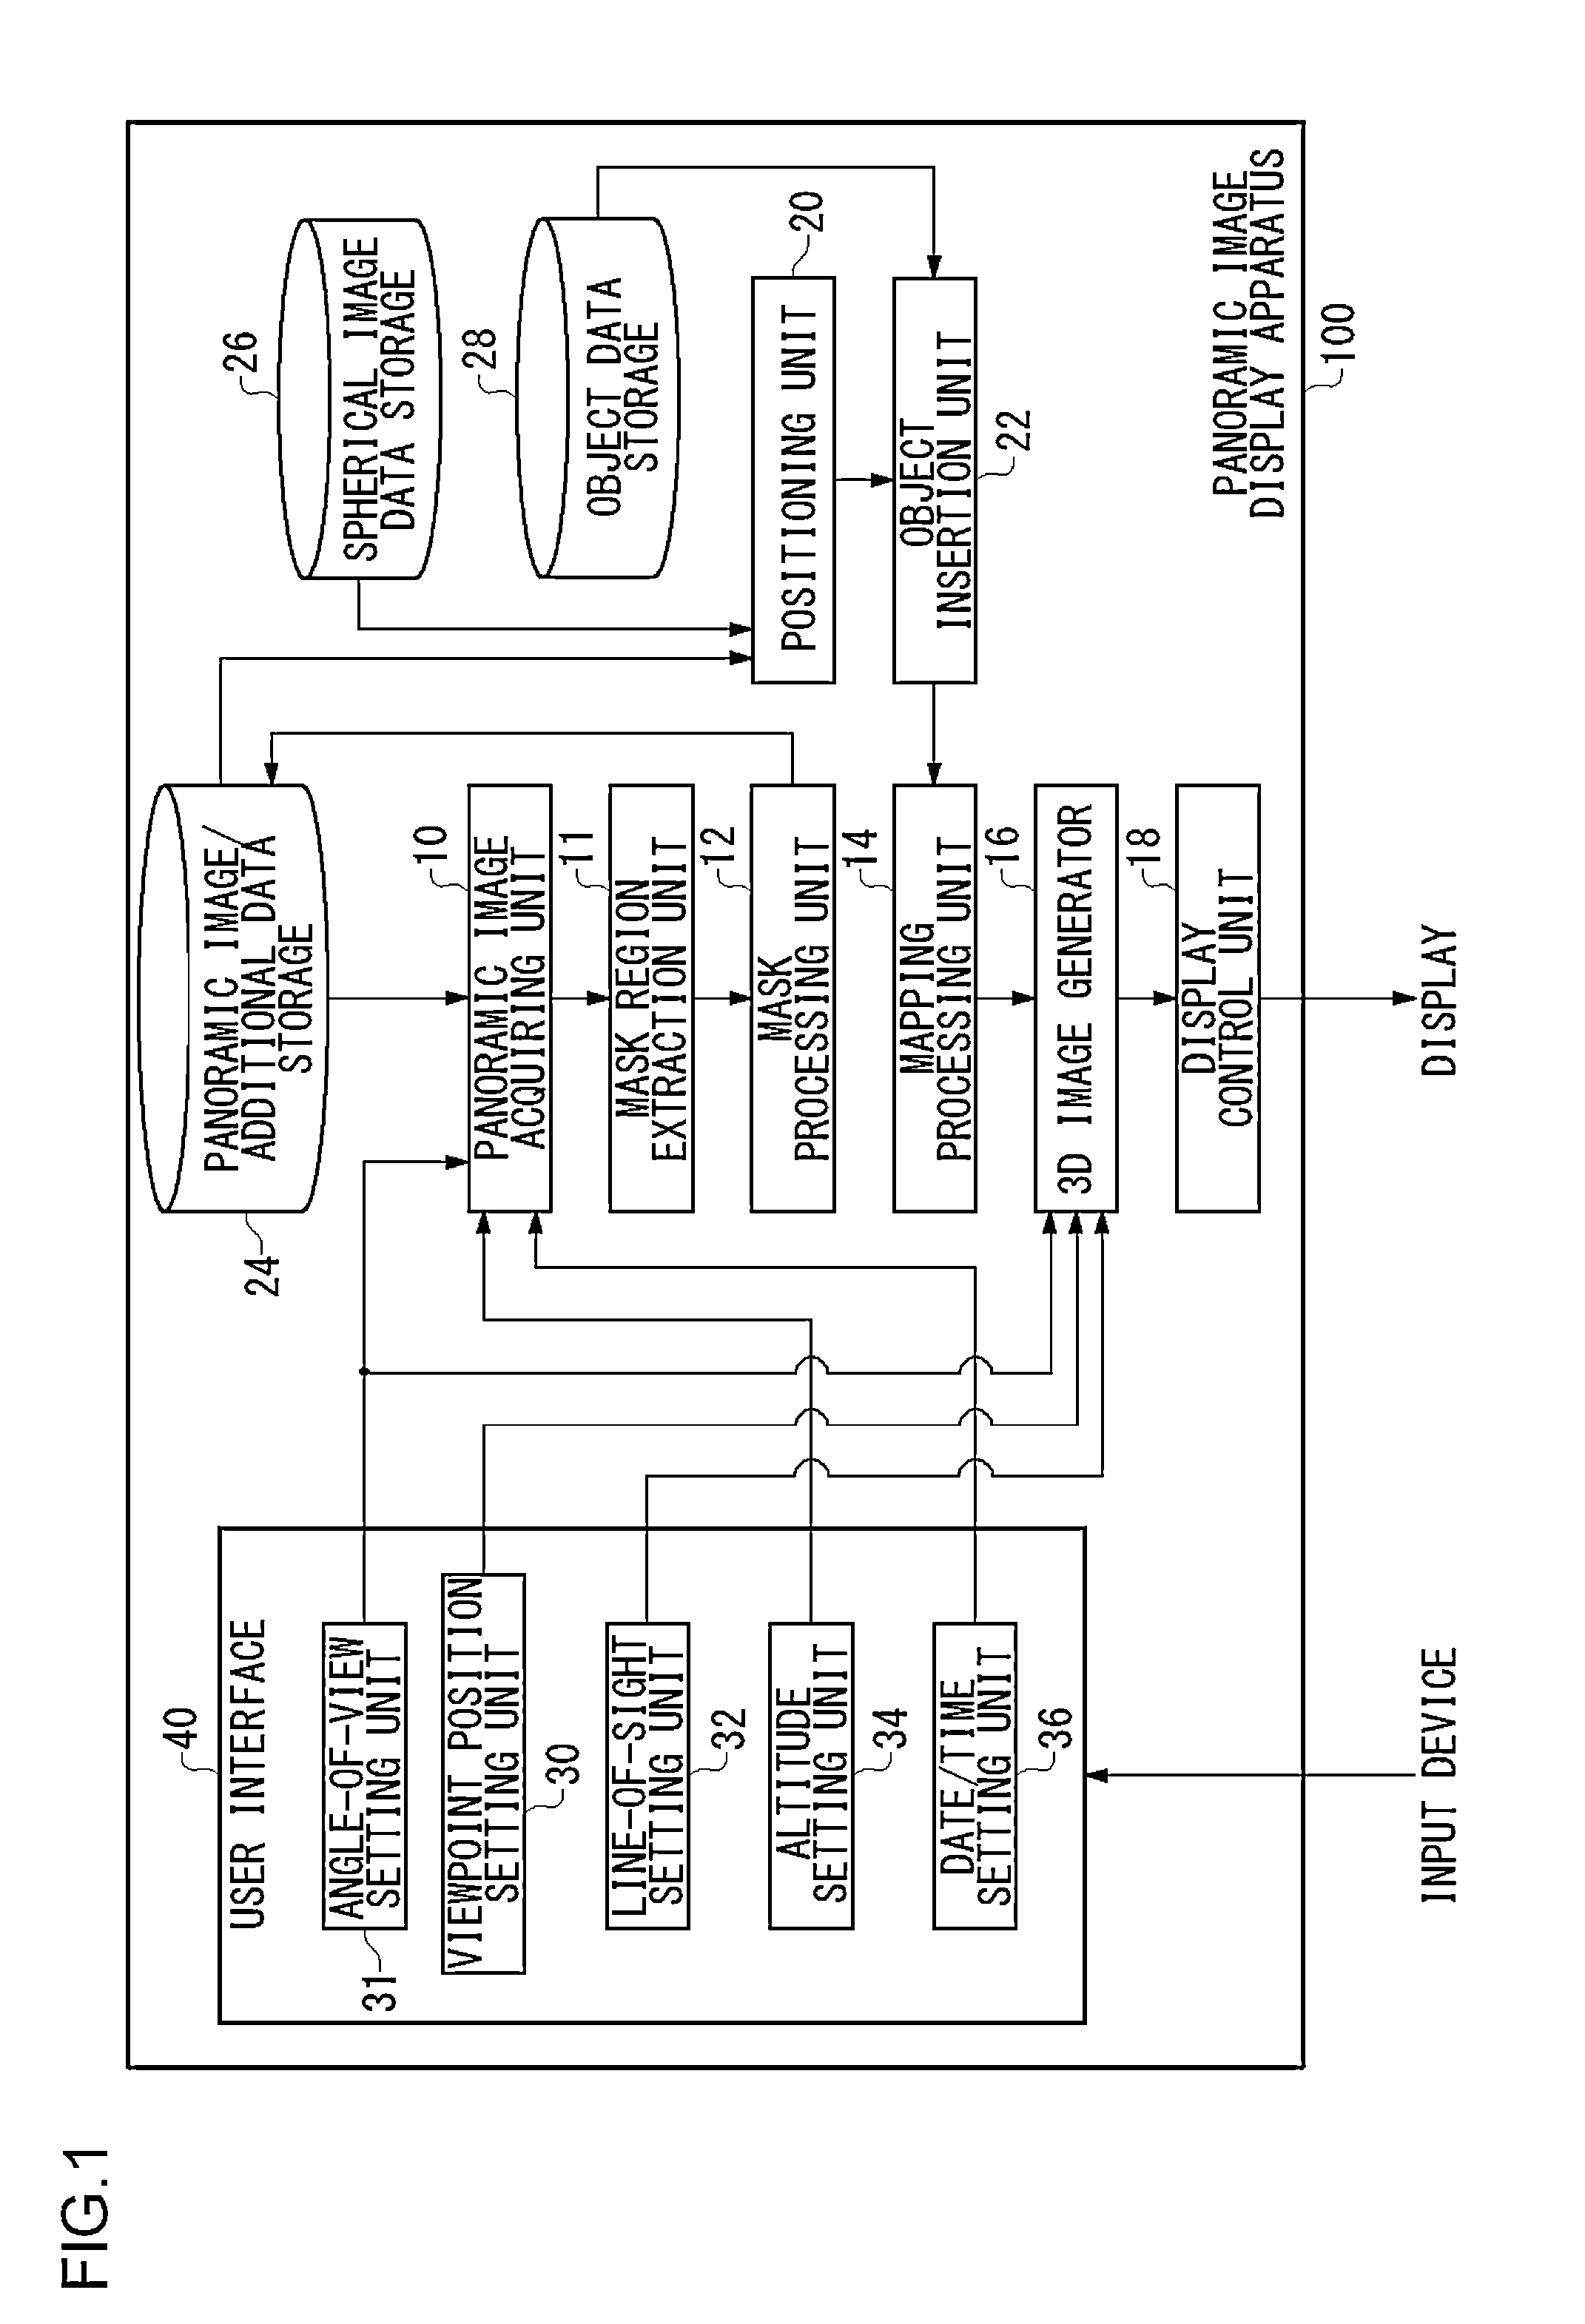 Apparatus and method for displaying images